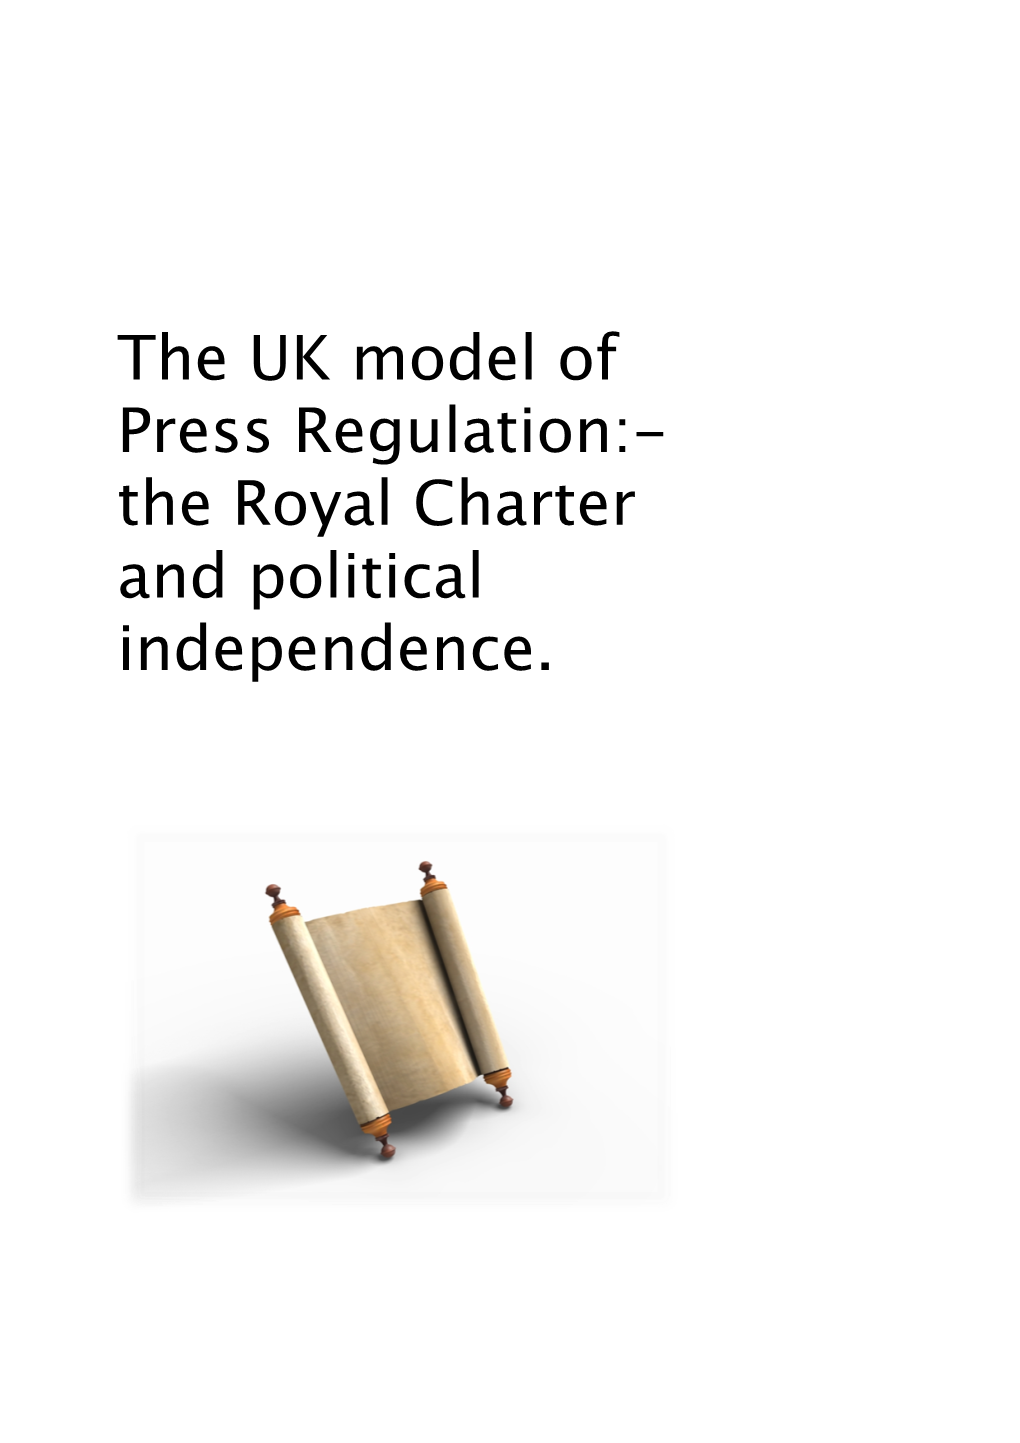 The Royal Charter and Political Independence